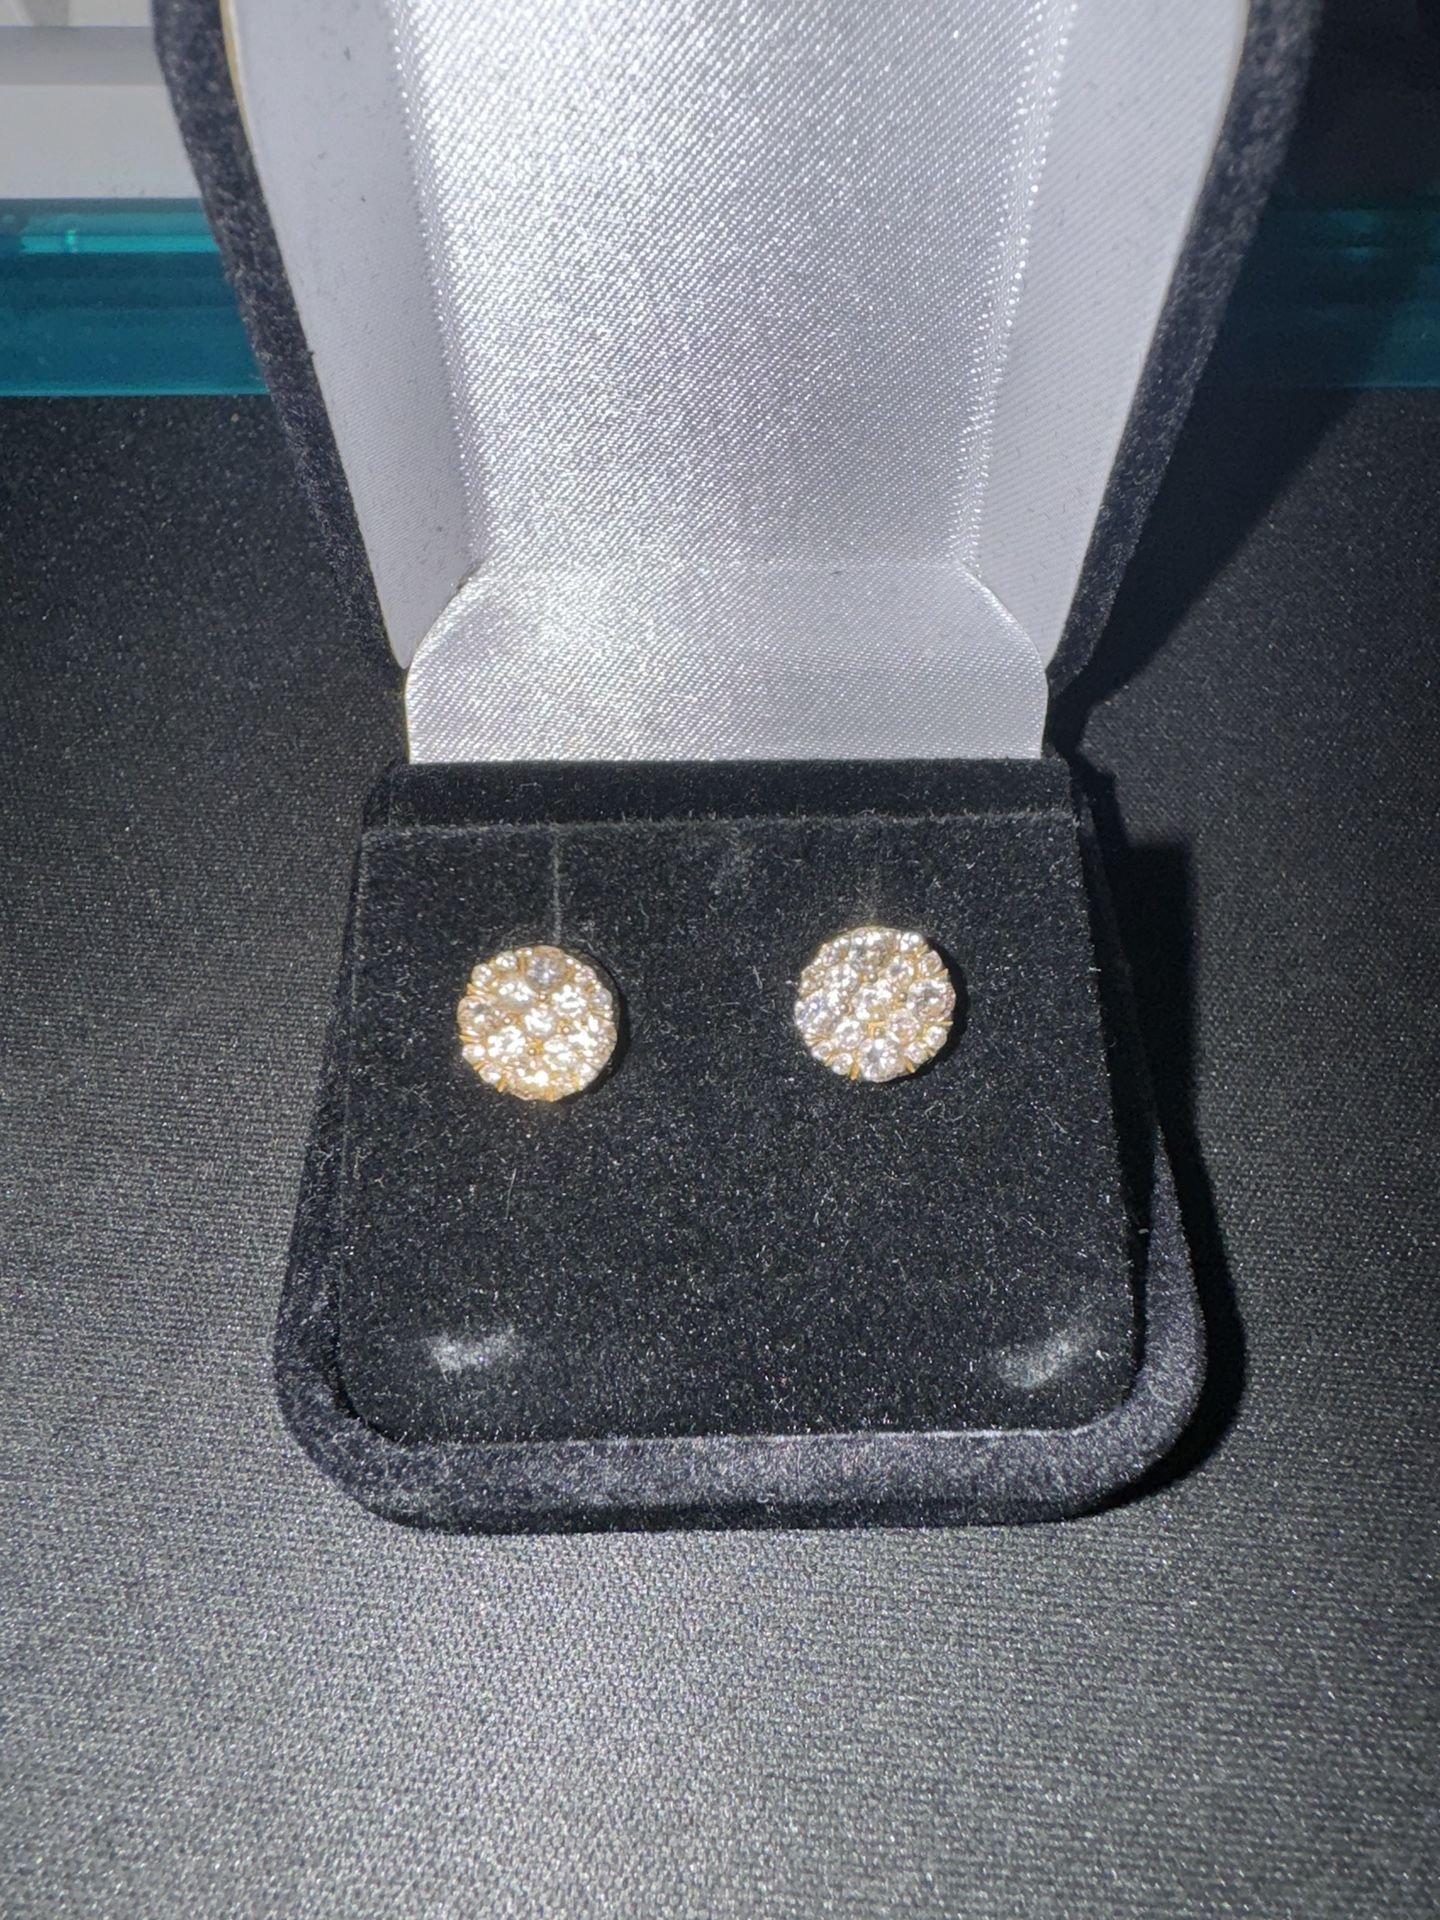 14 Kt Gold And Diamond Earrings